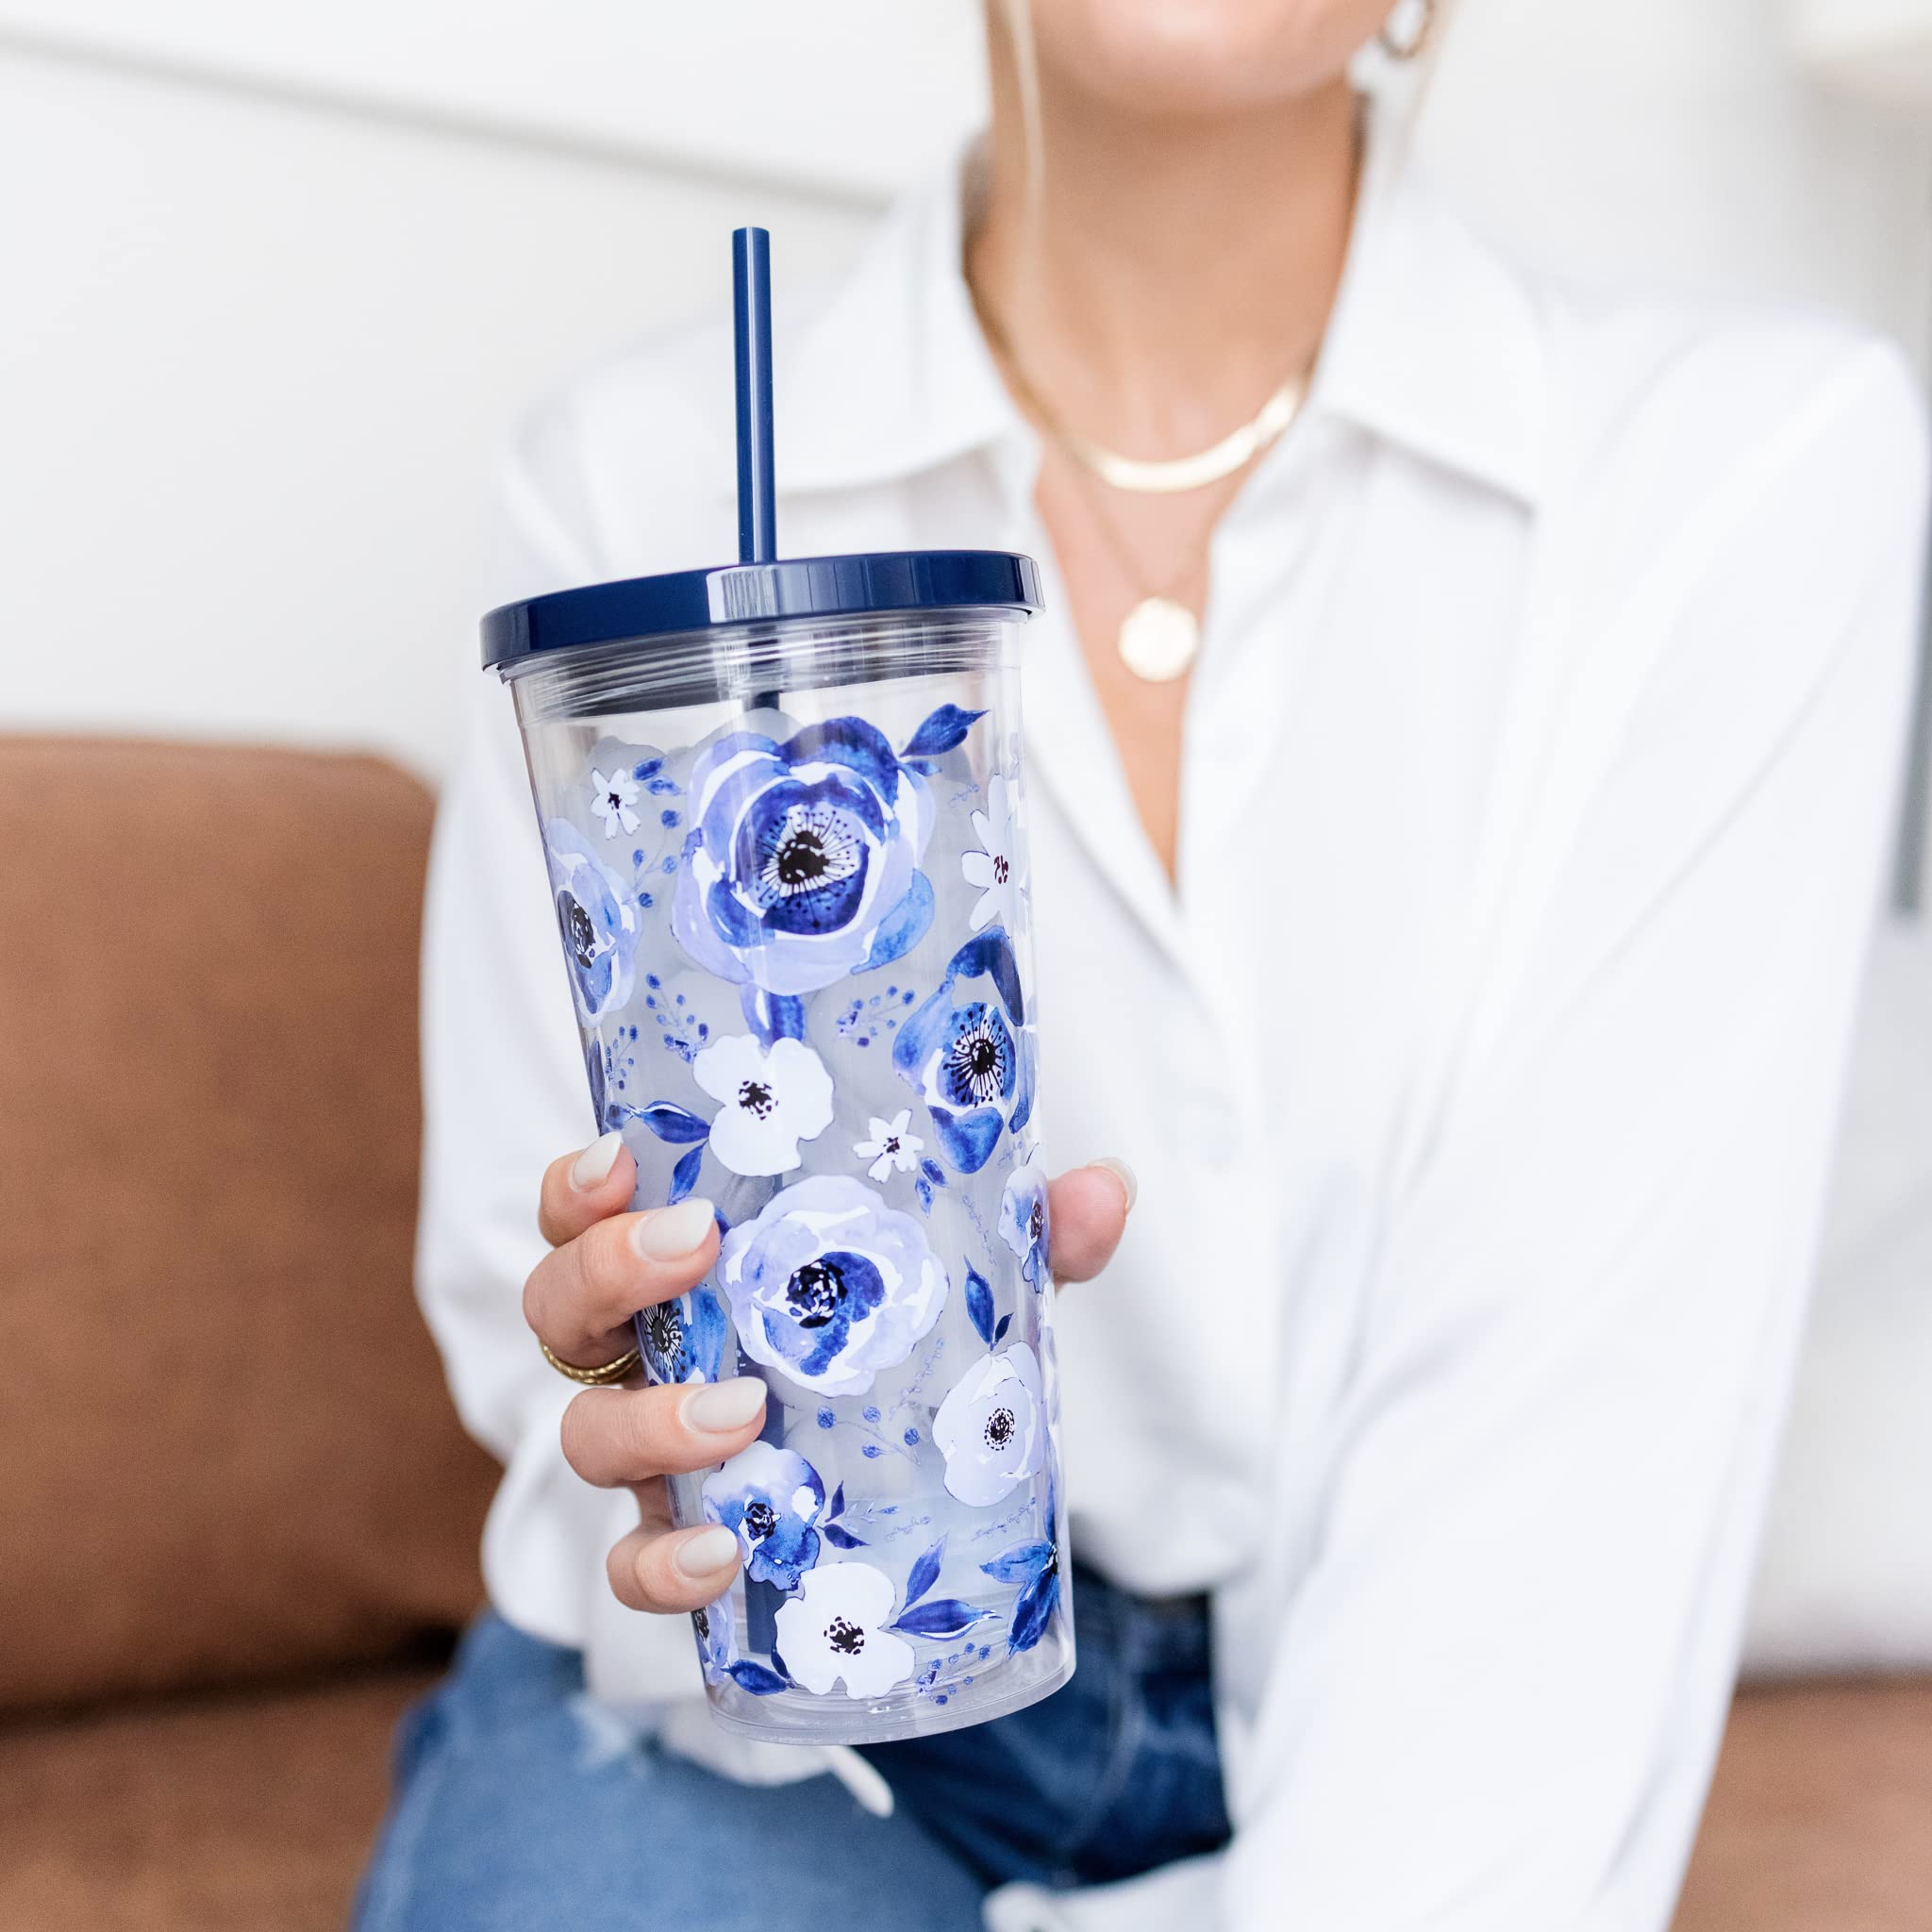 Steel Mill & Co Insulated Cup with Lid and Straw, Floral 24oz Tumbler, Double Wall Travel Cup, BPA-Free Acrylic Tumbler, Fits in Cupholders, Blue Watercolor